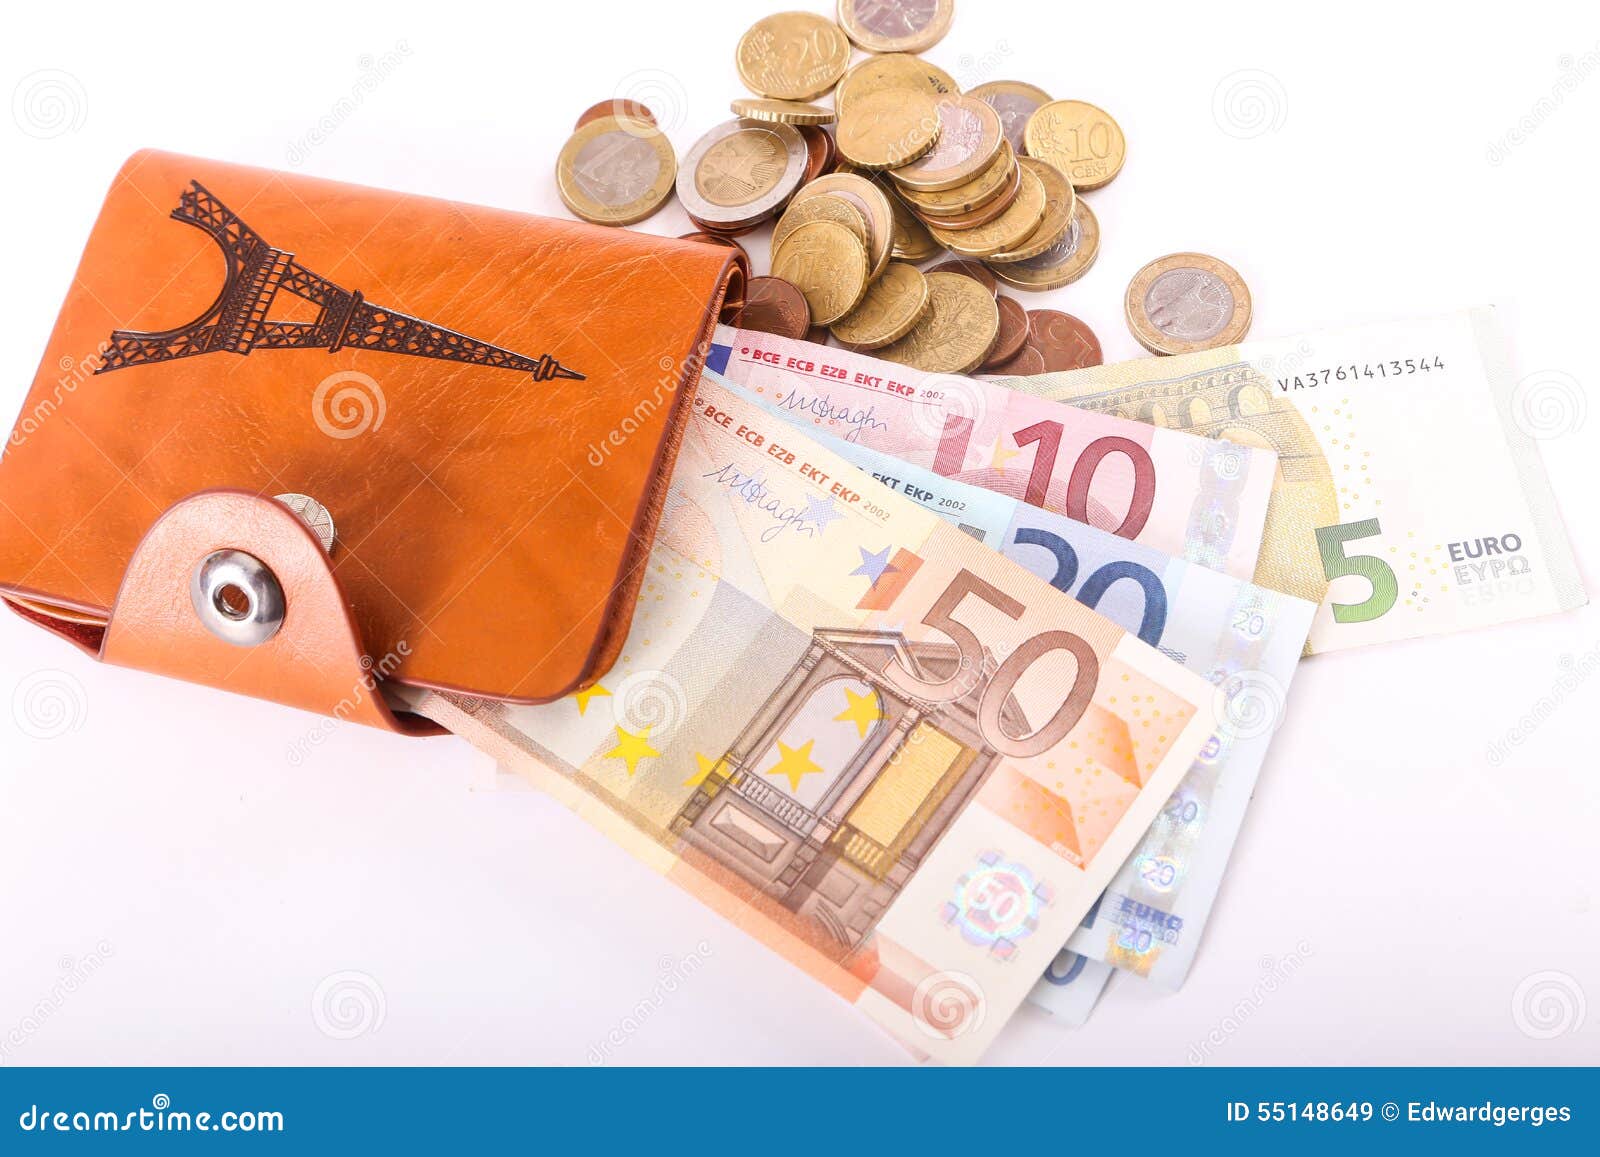 Wallet Euros stock image. Image of fashion, concept, currency - 55148649